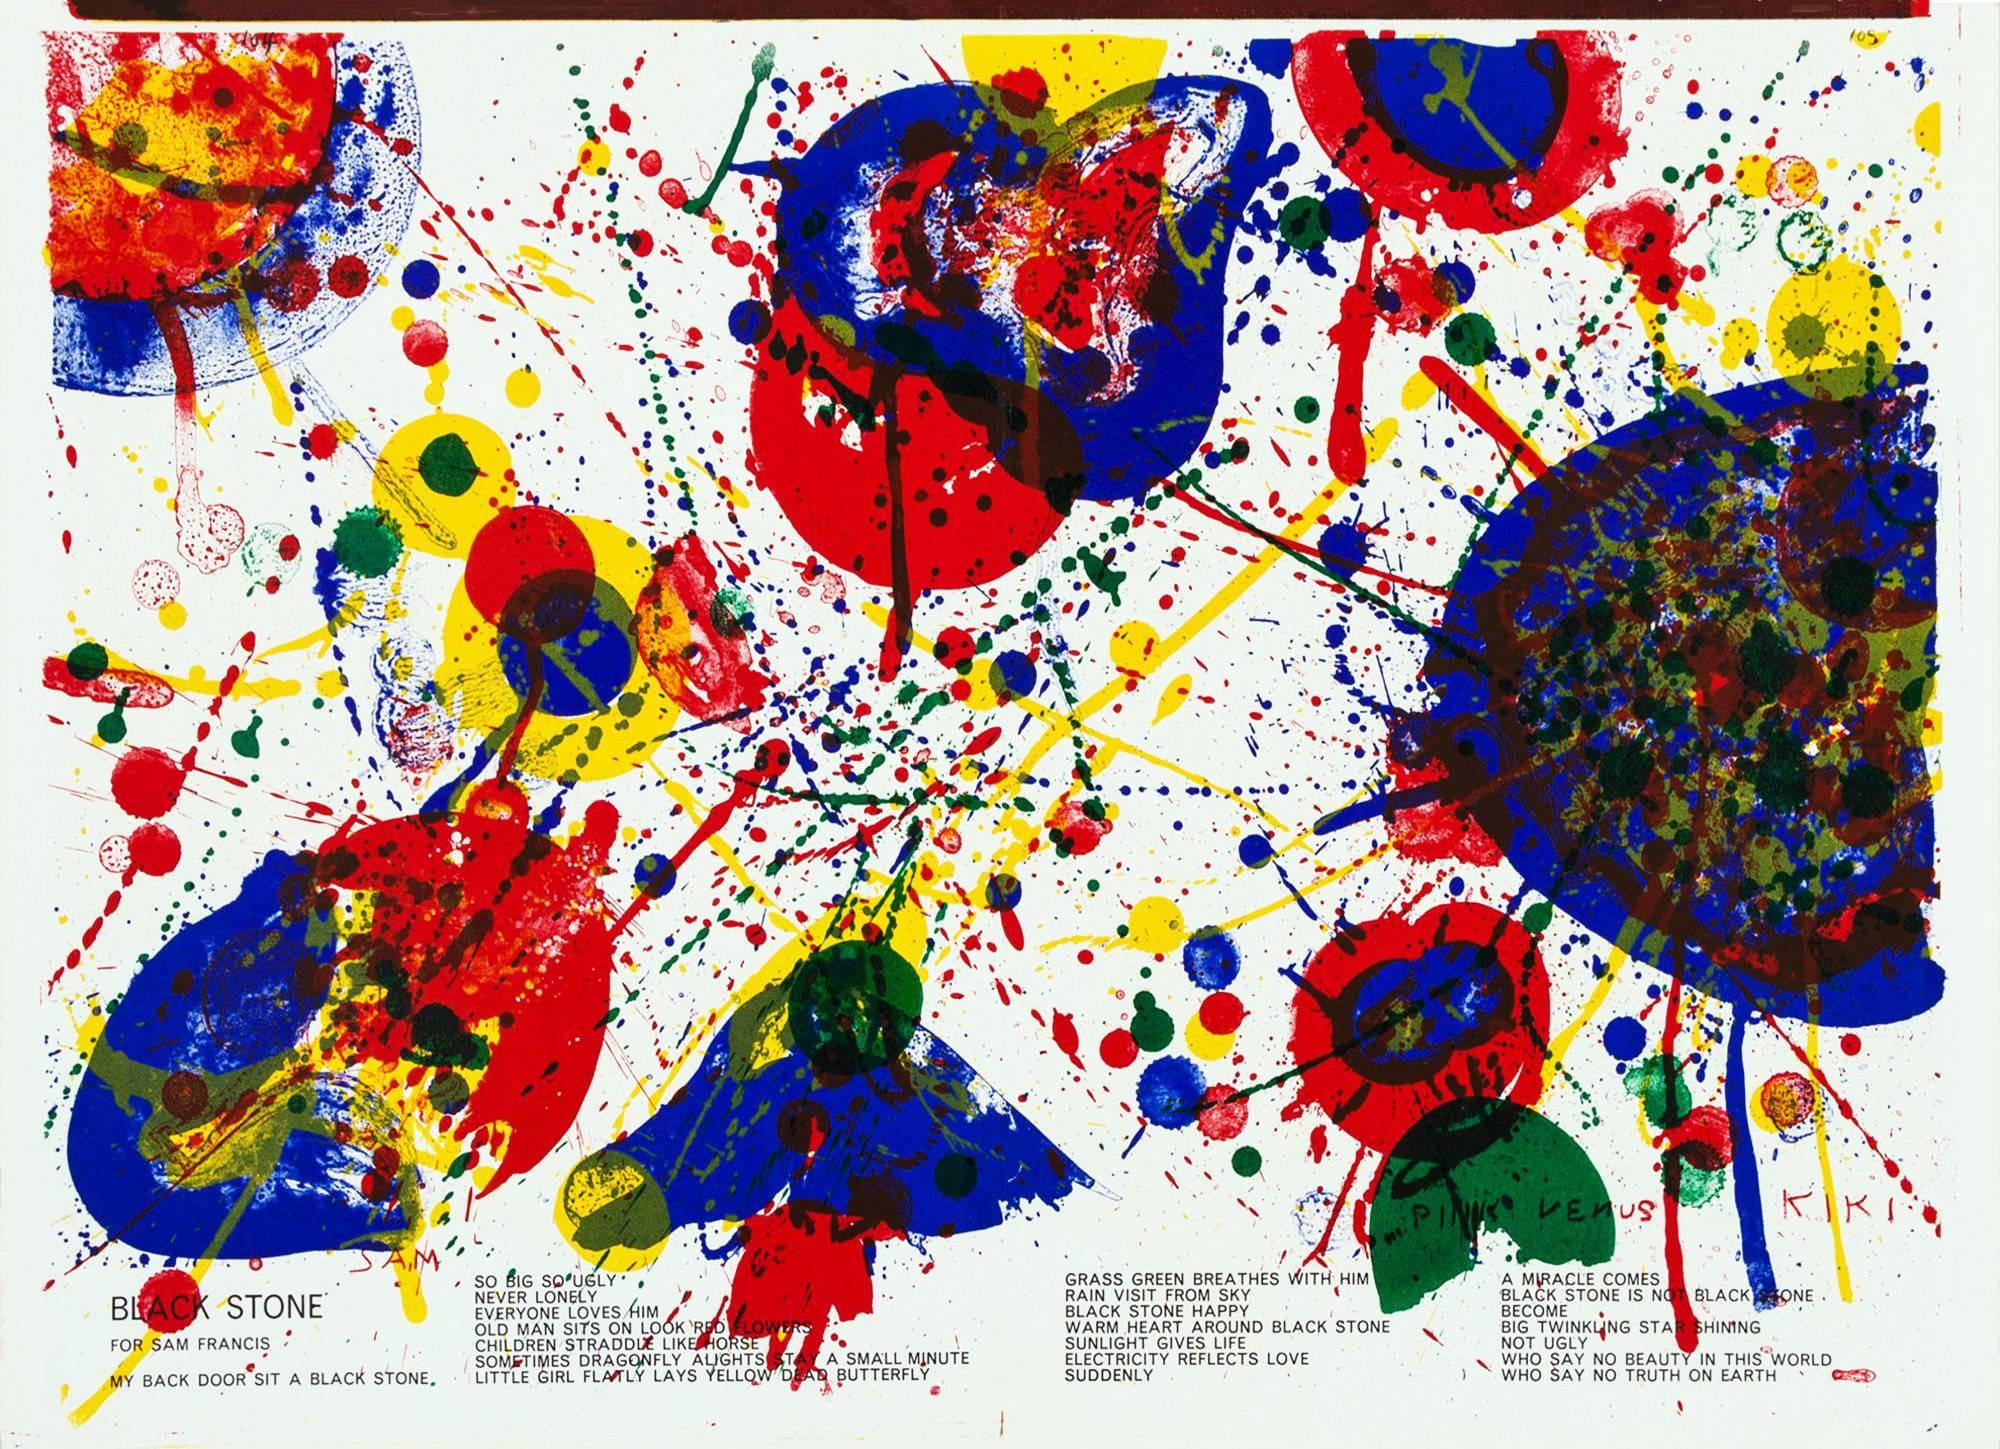 Sam Francis Lithograph, 1964
Portfolio: 1 Cent Life, 1964: Published by E. W. Kornfeld, Bern, Switzerland 
Title: Sam Francis "Blackstone"

Original lithograph in colors
16 x 23 in (40.64 x 58.42 cm)
Center fold-line as issued; otherwise